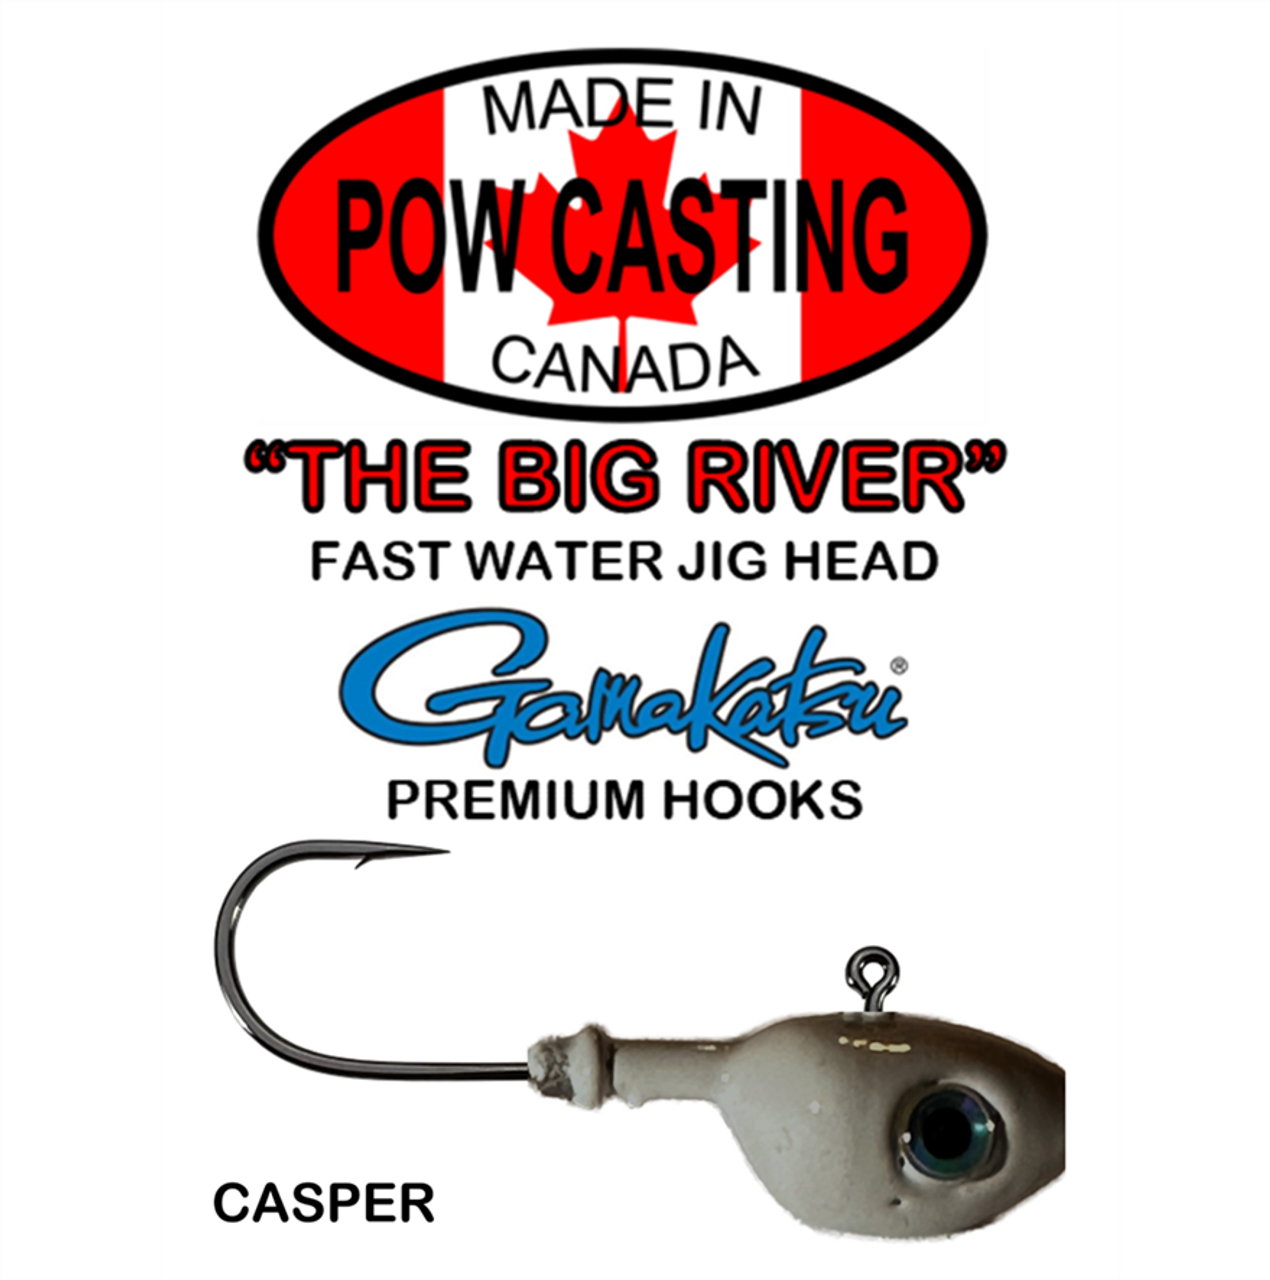 Big River Jig Heads (2 Pack) - Tequila Sunrise - 3/8 to 1 1/8 oz